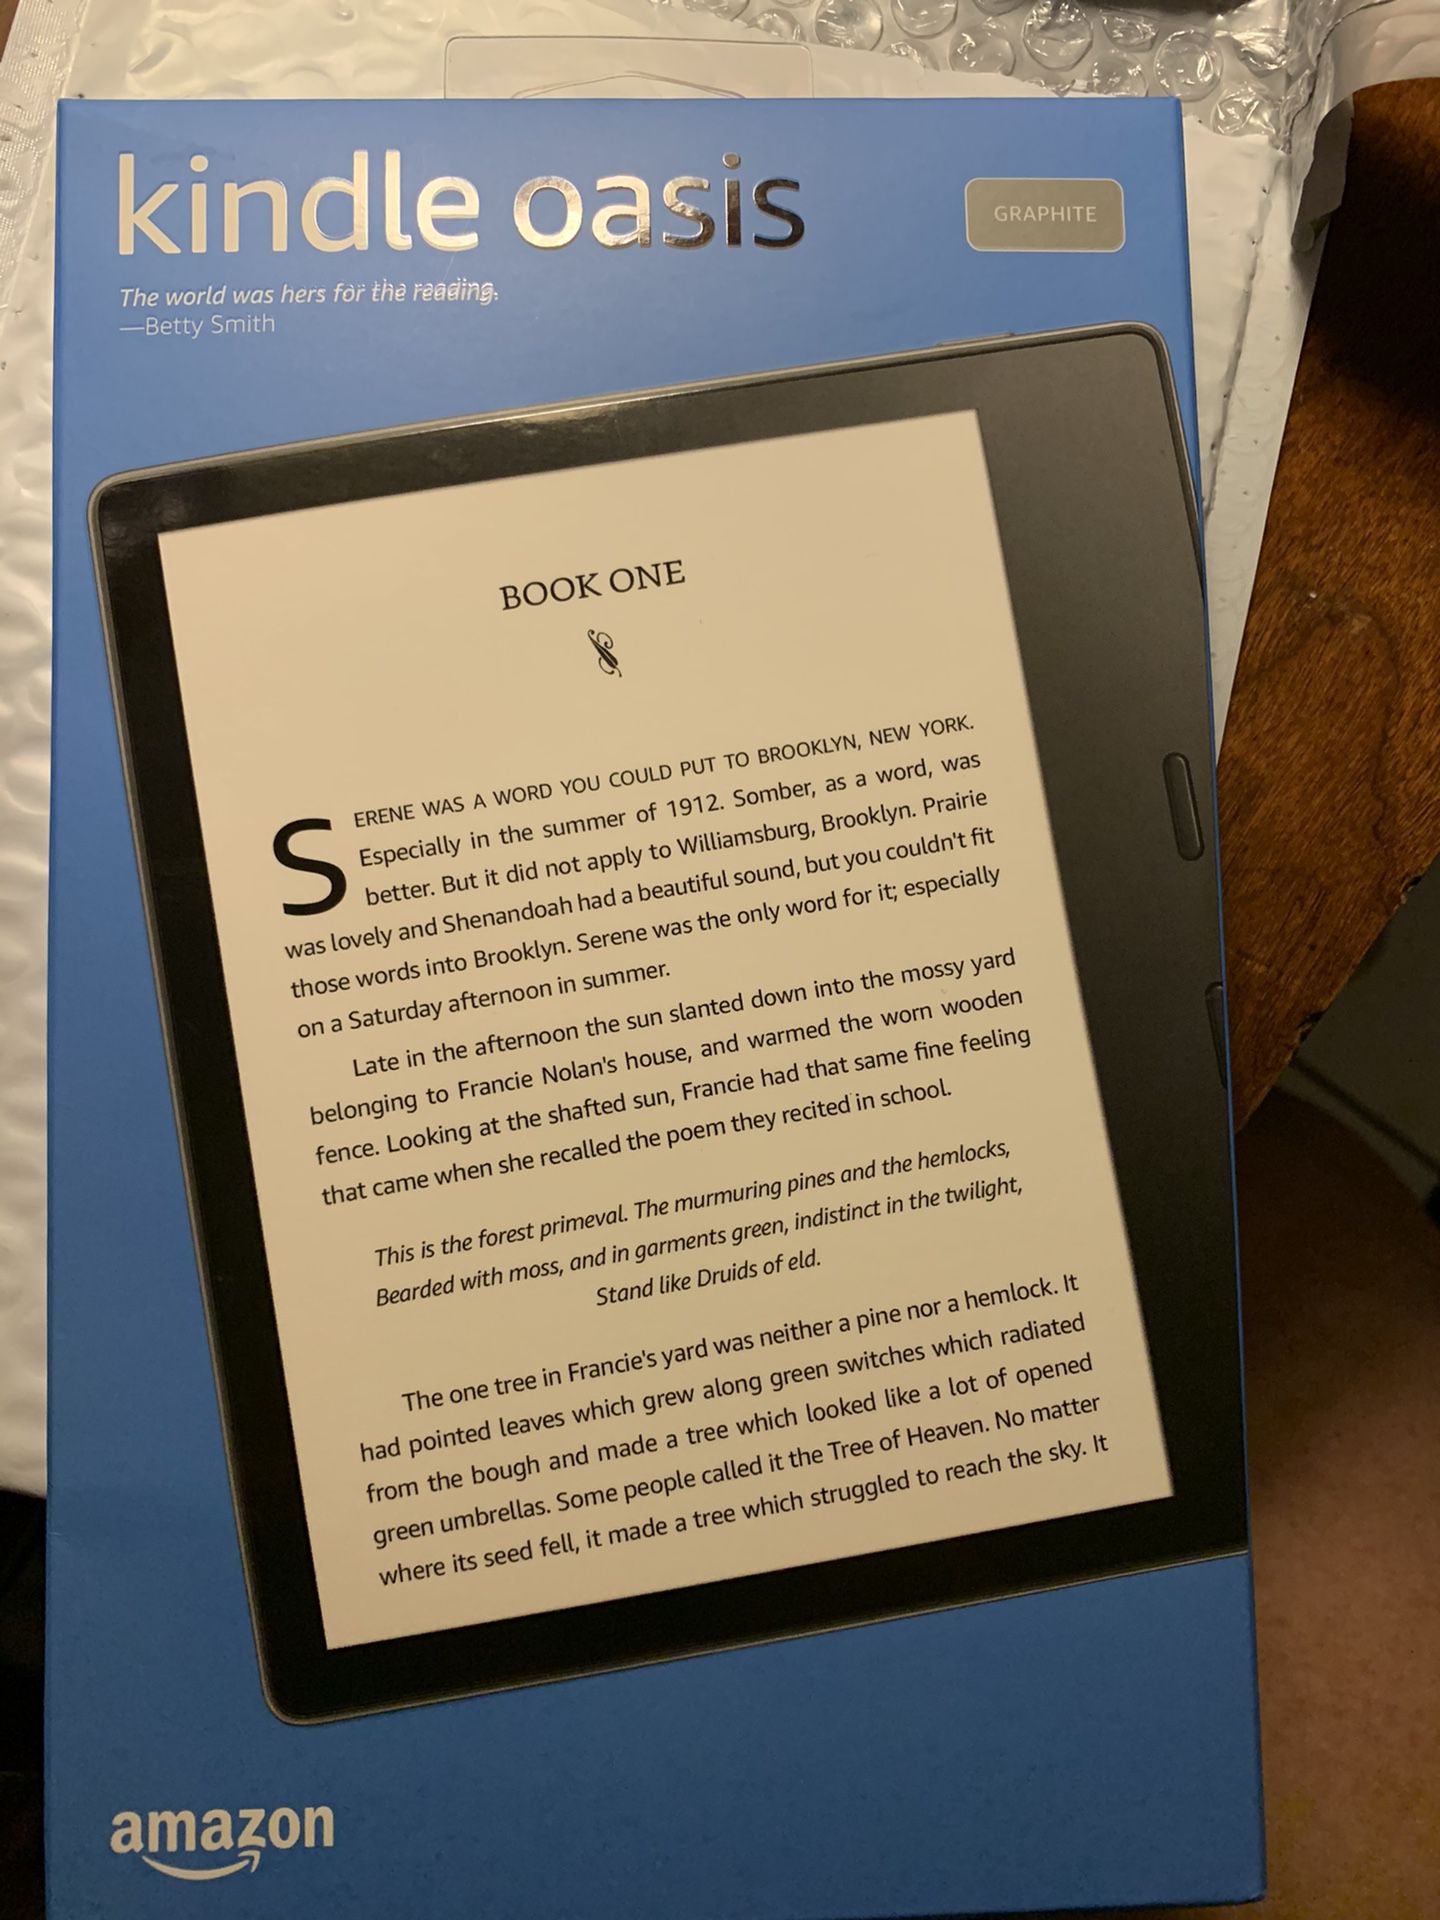 Kindle oasis 7” Display screen brand new 10th Generation